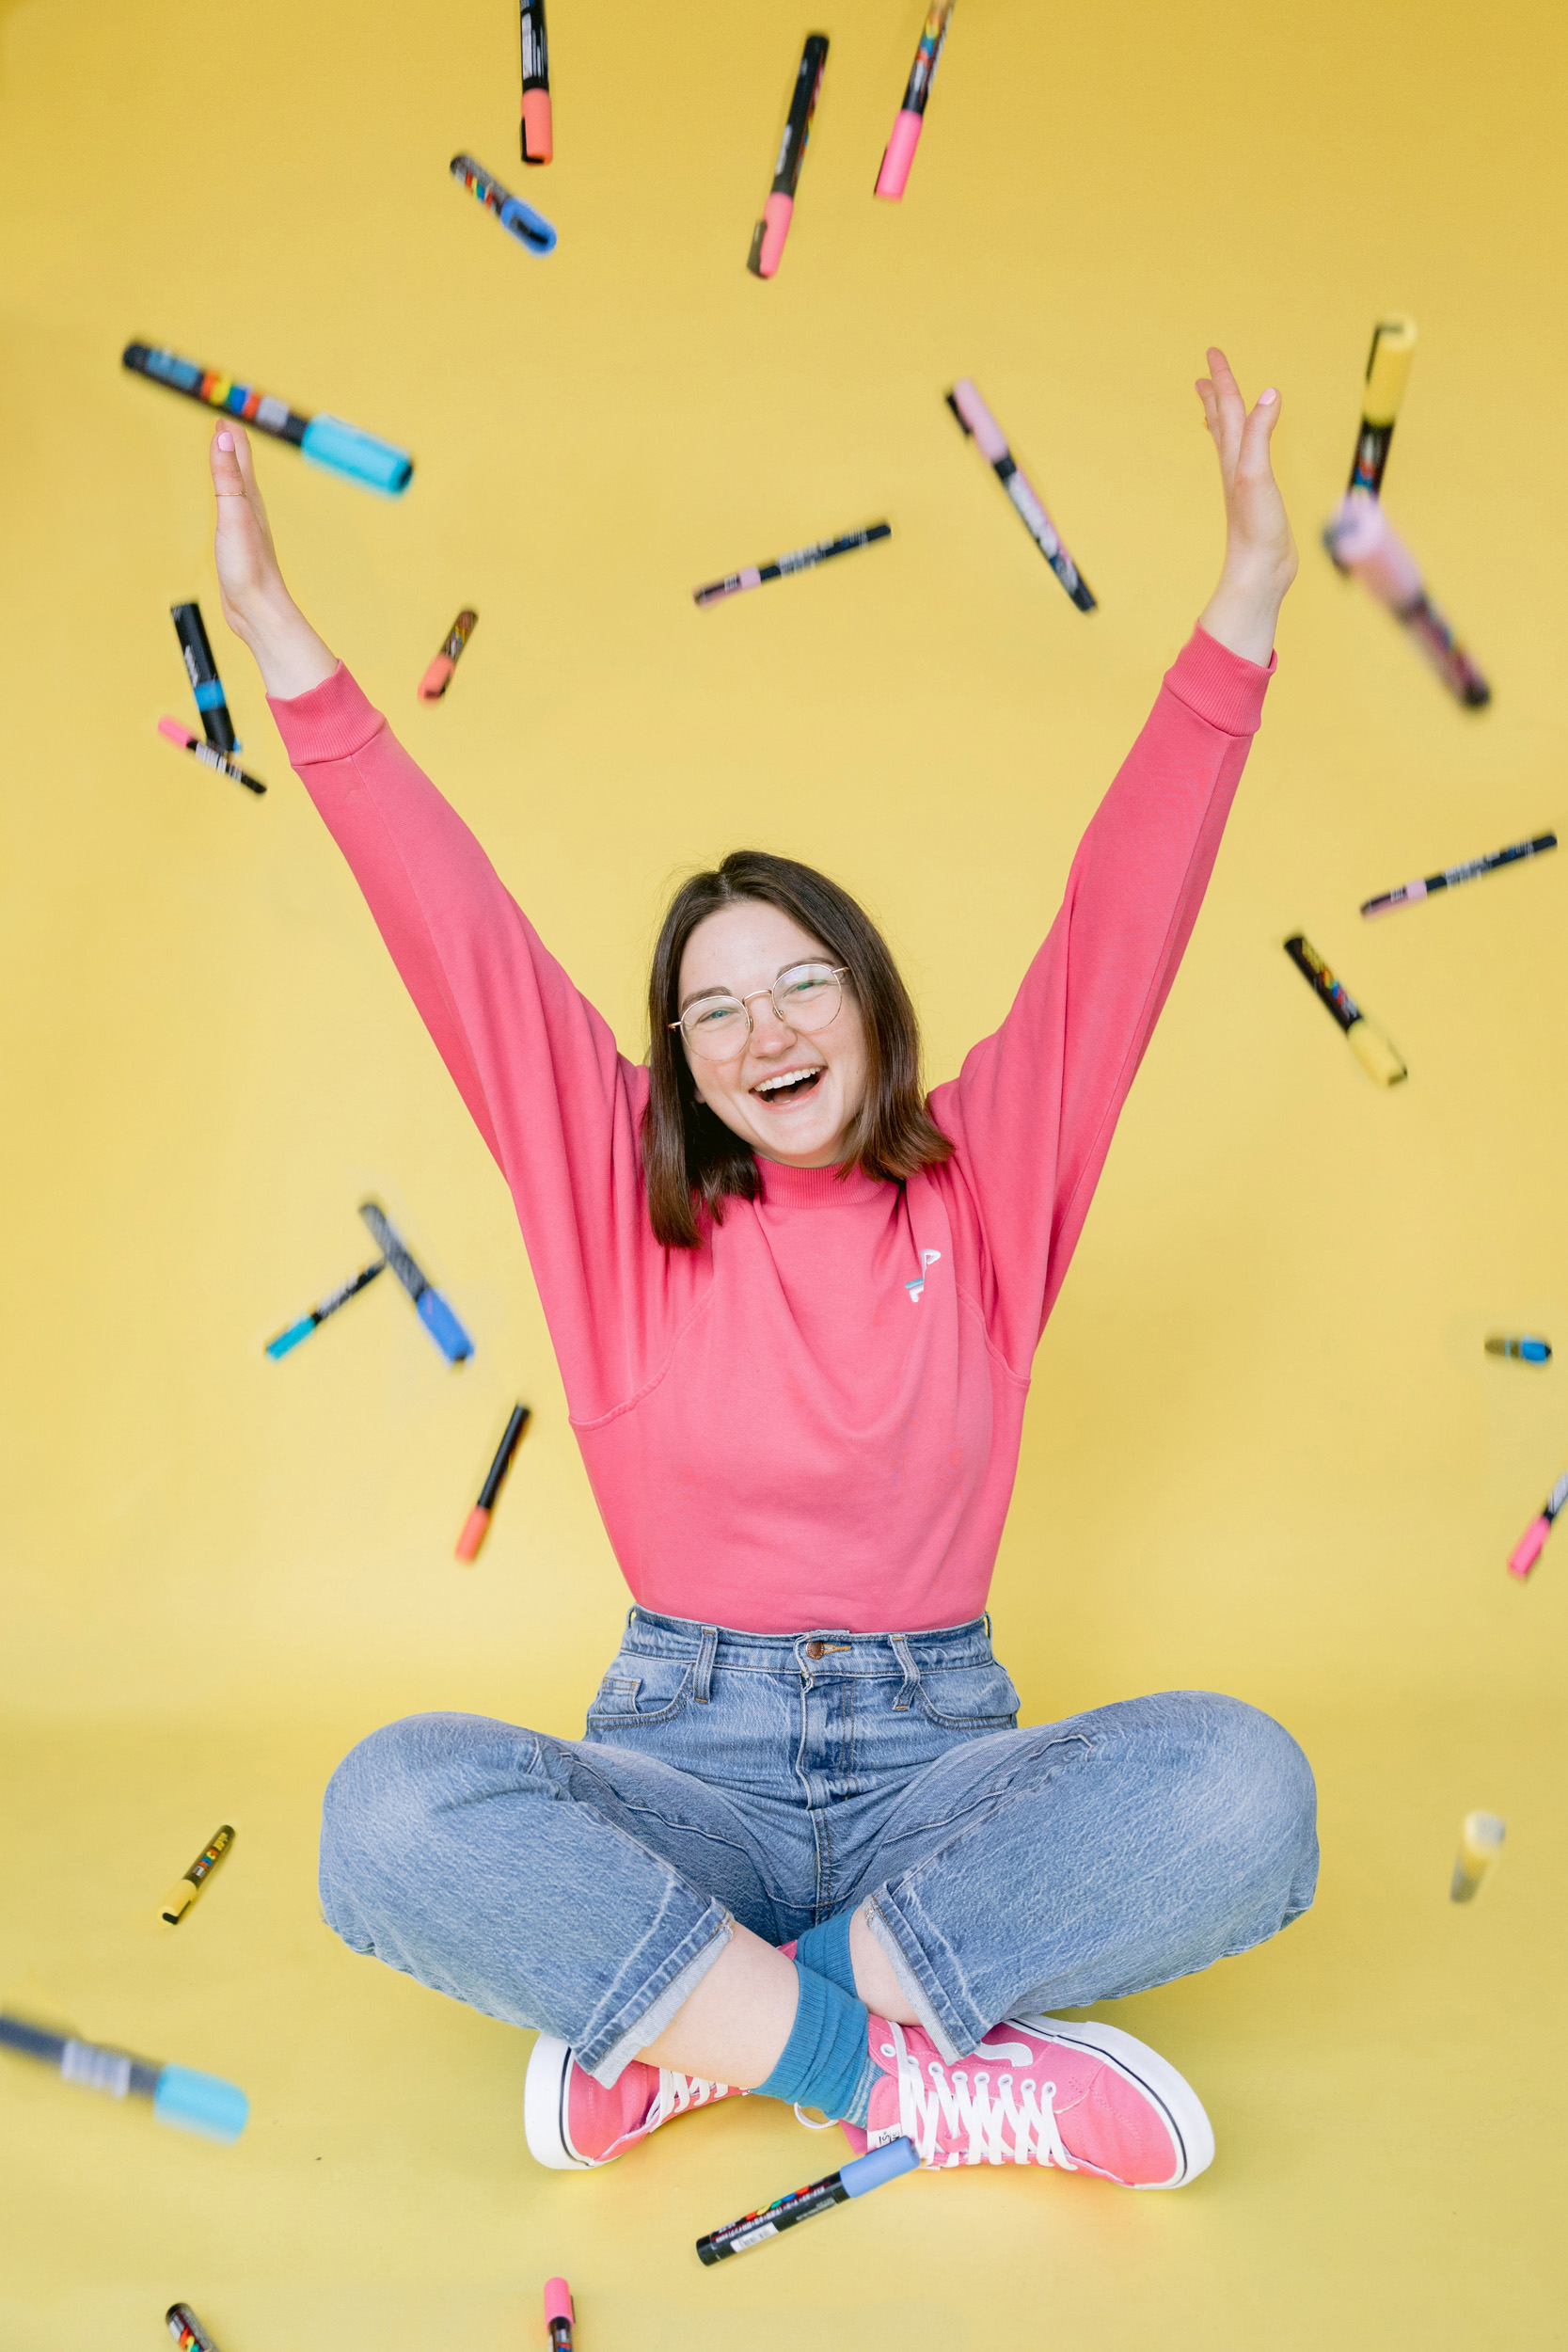 Artist Liz Brindley throws Pasca markers into the air on a bright yellow background while laughing